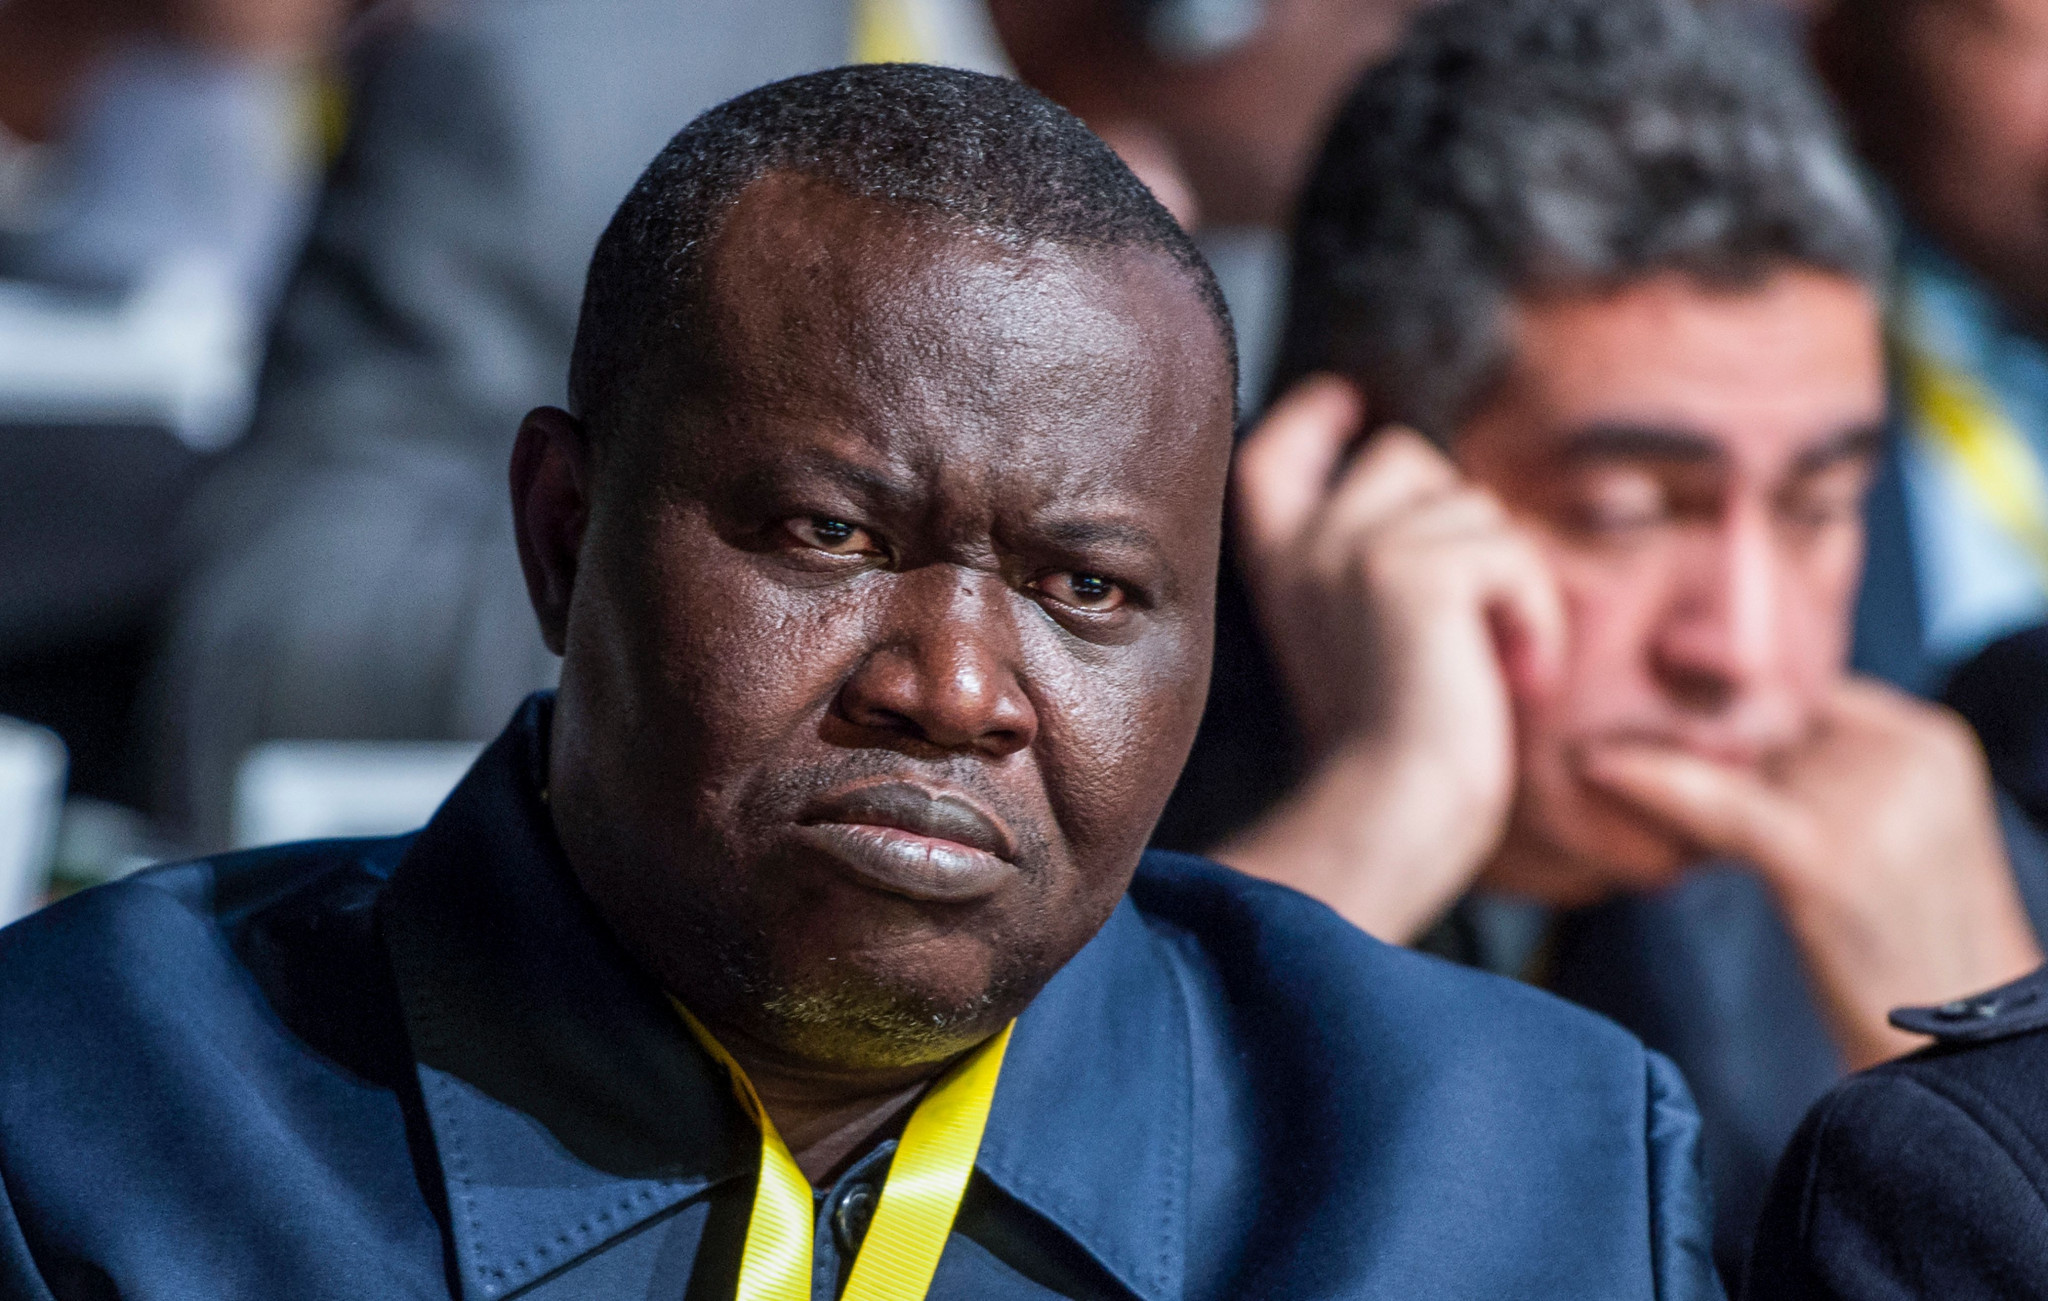 CAF Executive Committee member Ngaissona extradited to The Hague for war crimes trial